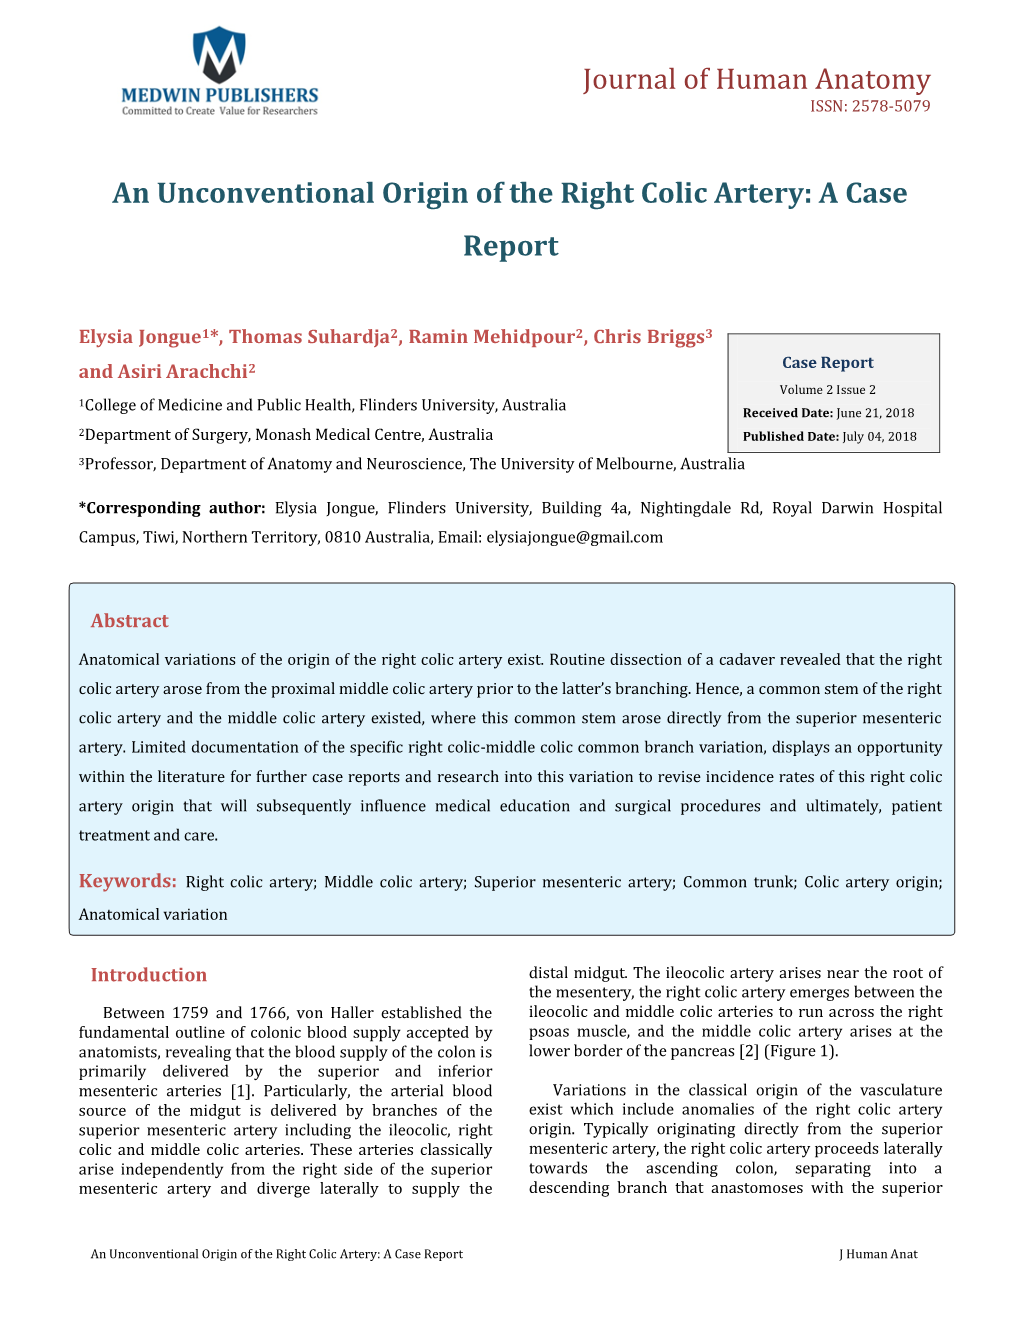 An Unconventional Origin of the Right Colic Artery: a Case Report